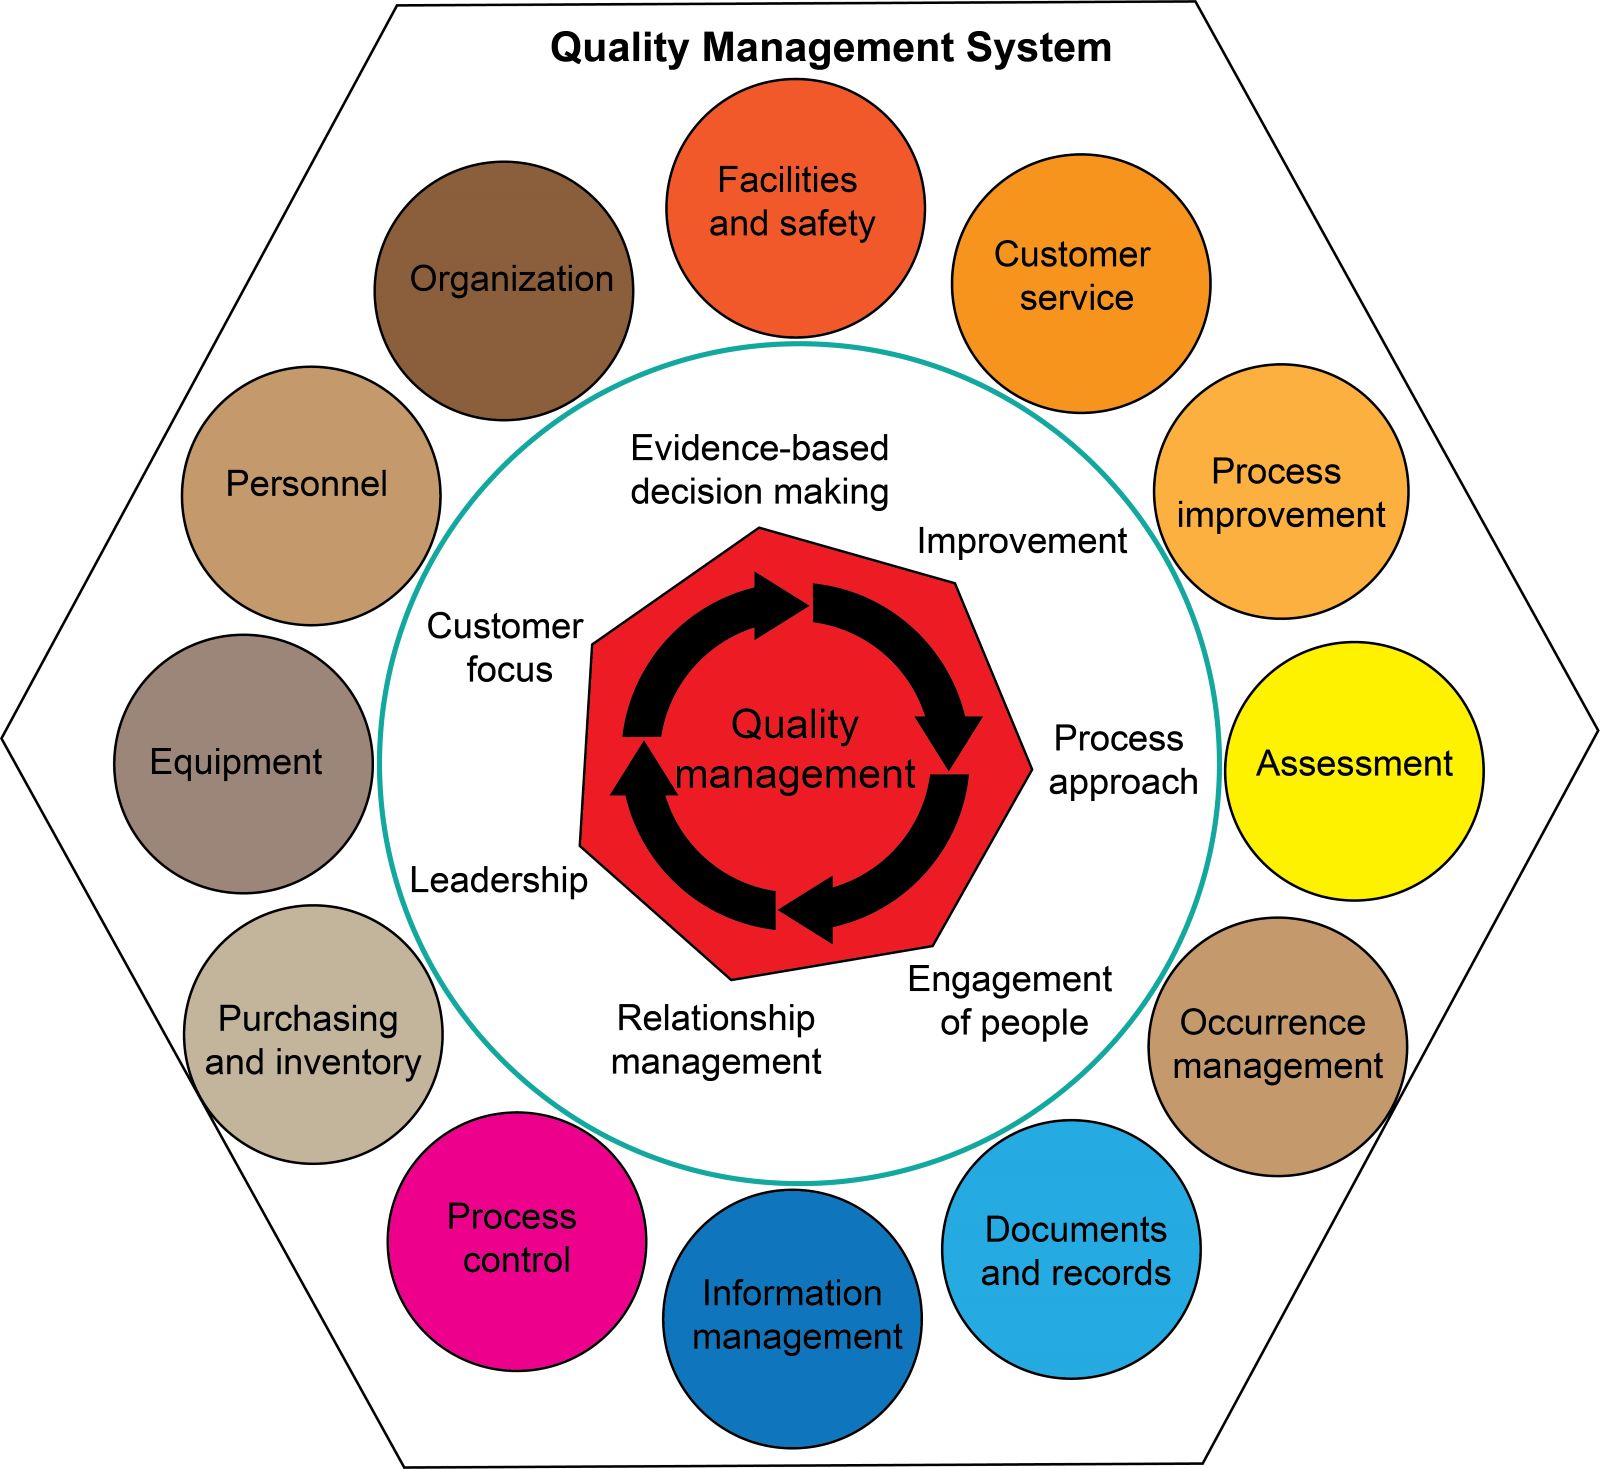 An integrated quality management system